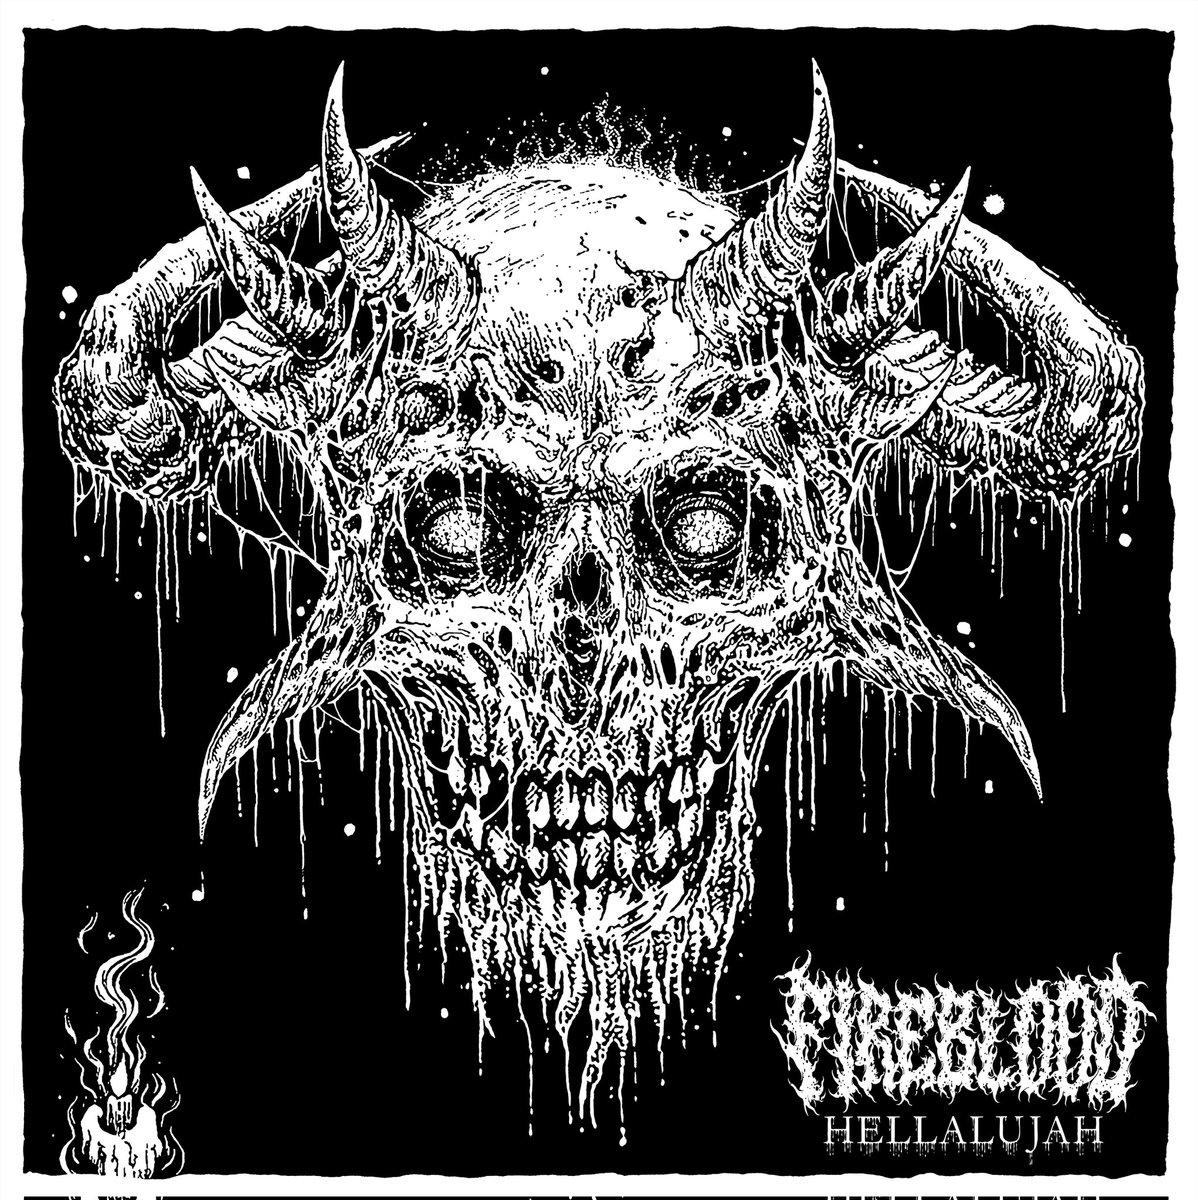 FIREBLOOD - Hellalujah (New EP) 2024 fireblood.bandcamp.com/album/hellaluj… Featuring members of Occult Fracture, From the Gun and StormWatchers, FIREBLOOD is a sludge metal band with a Southern groove. Their music features atonal guitars, thick drums, grinding bass and unhinged vocals...